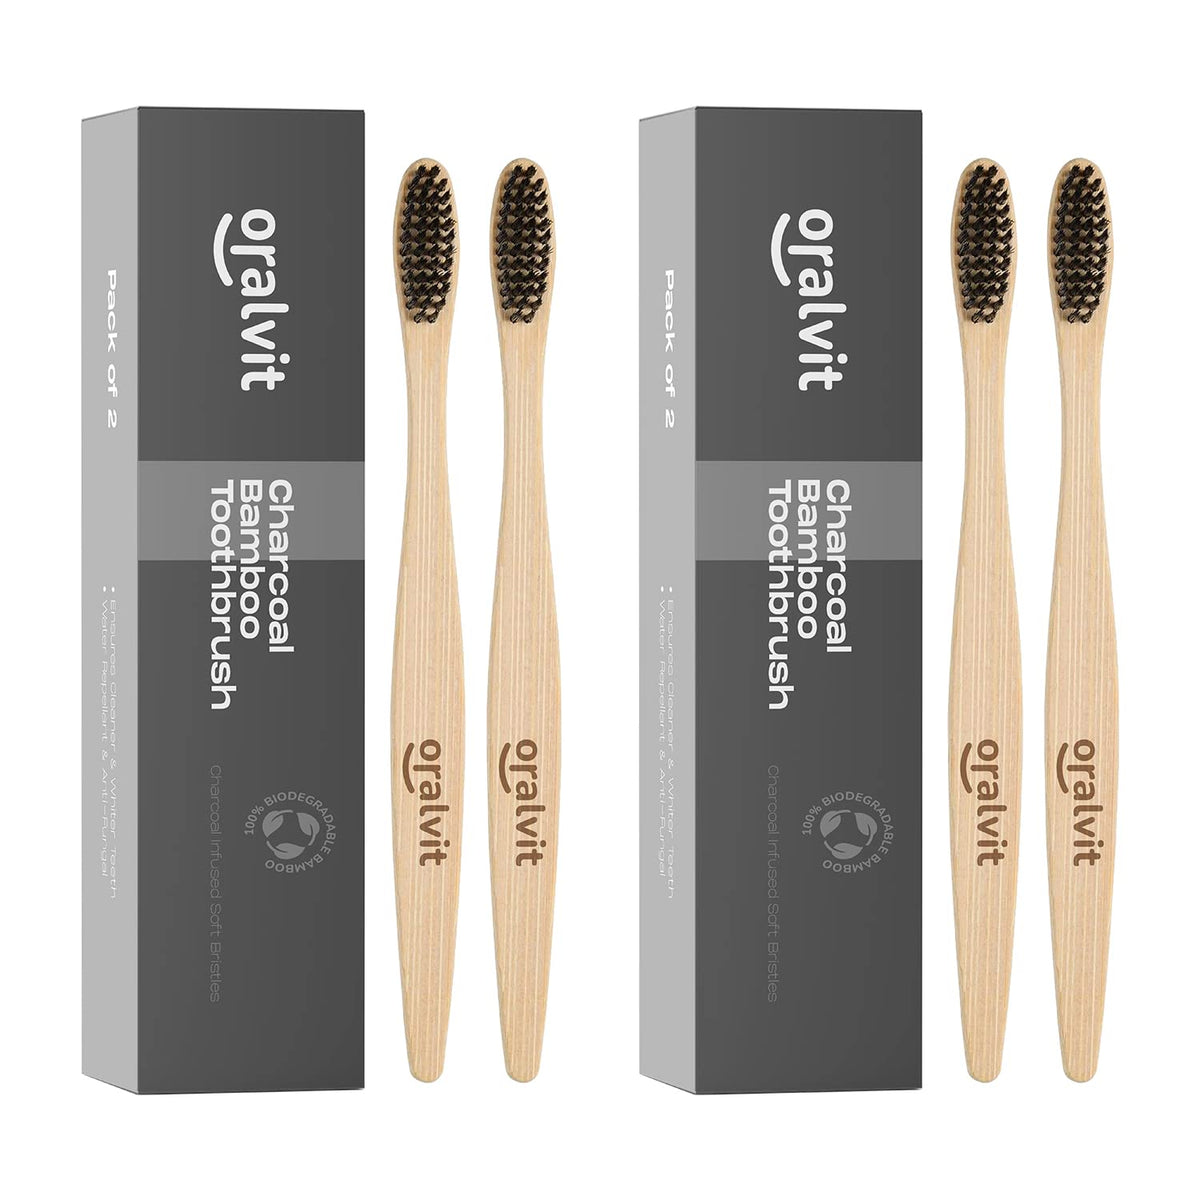 Oralvit Bamboo Charcoal Toothbrush 100% Natural | Anti-bacterial & Biodegradable | Eco-Friendly | For Adults & Kids | BPA Free - Pack of 2 (Pack of 2)